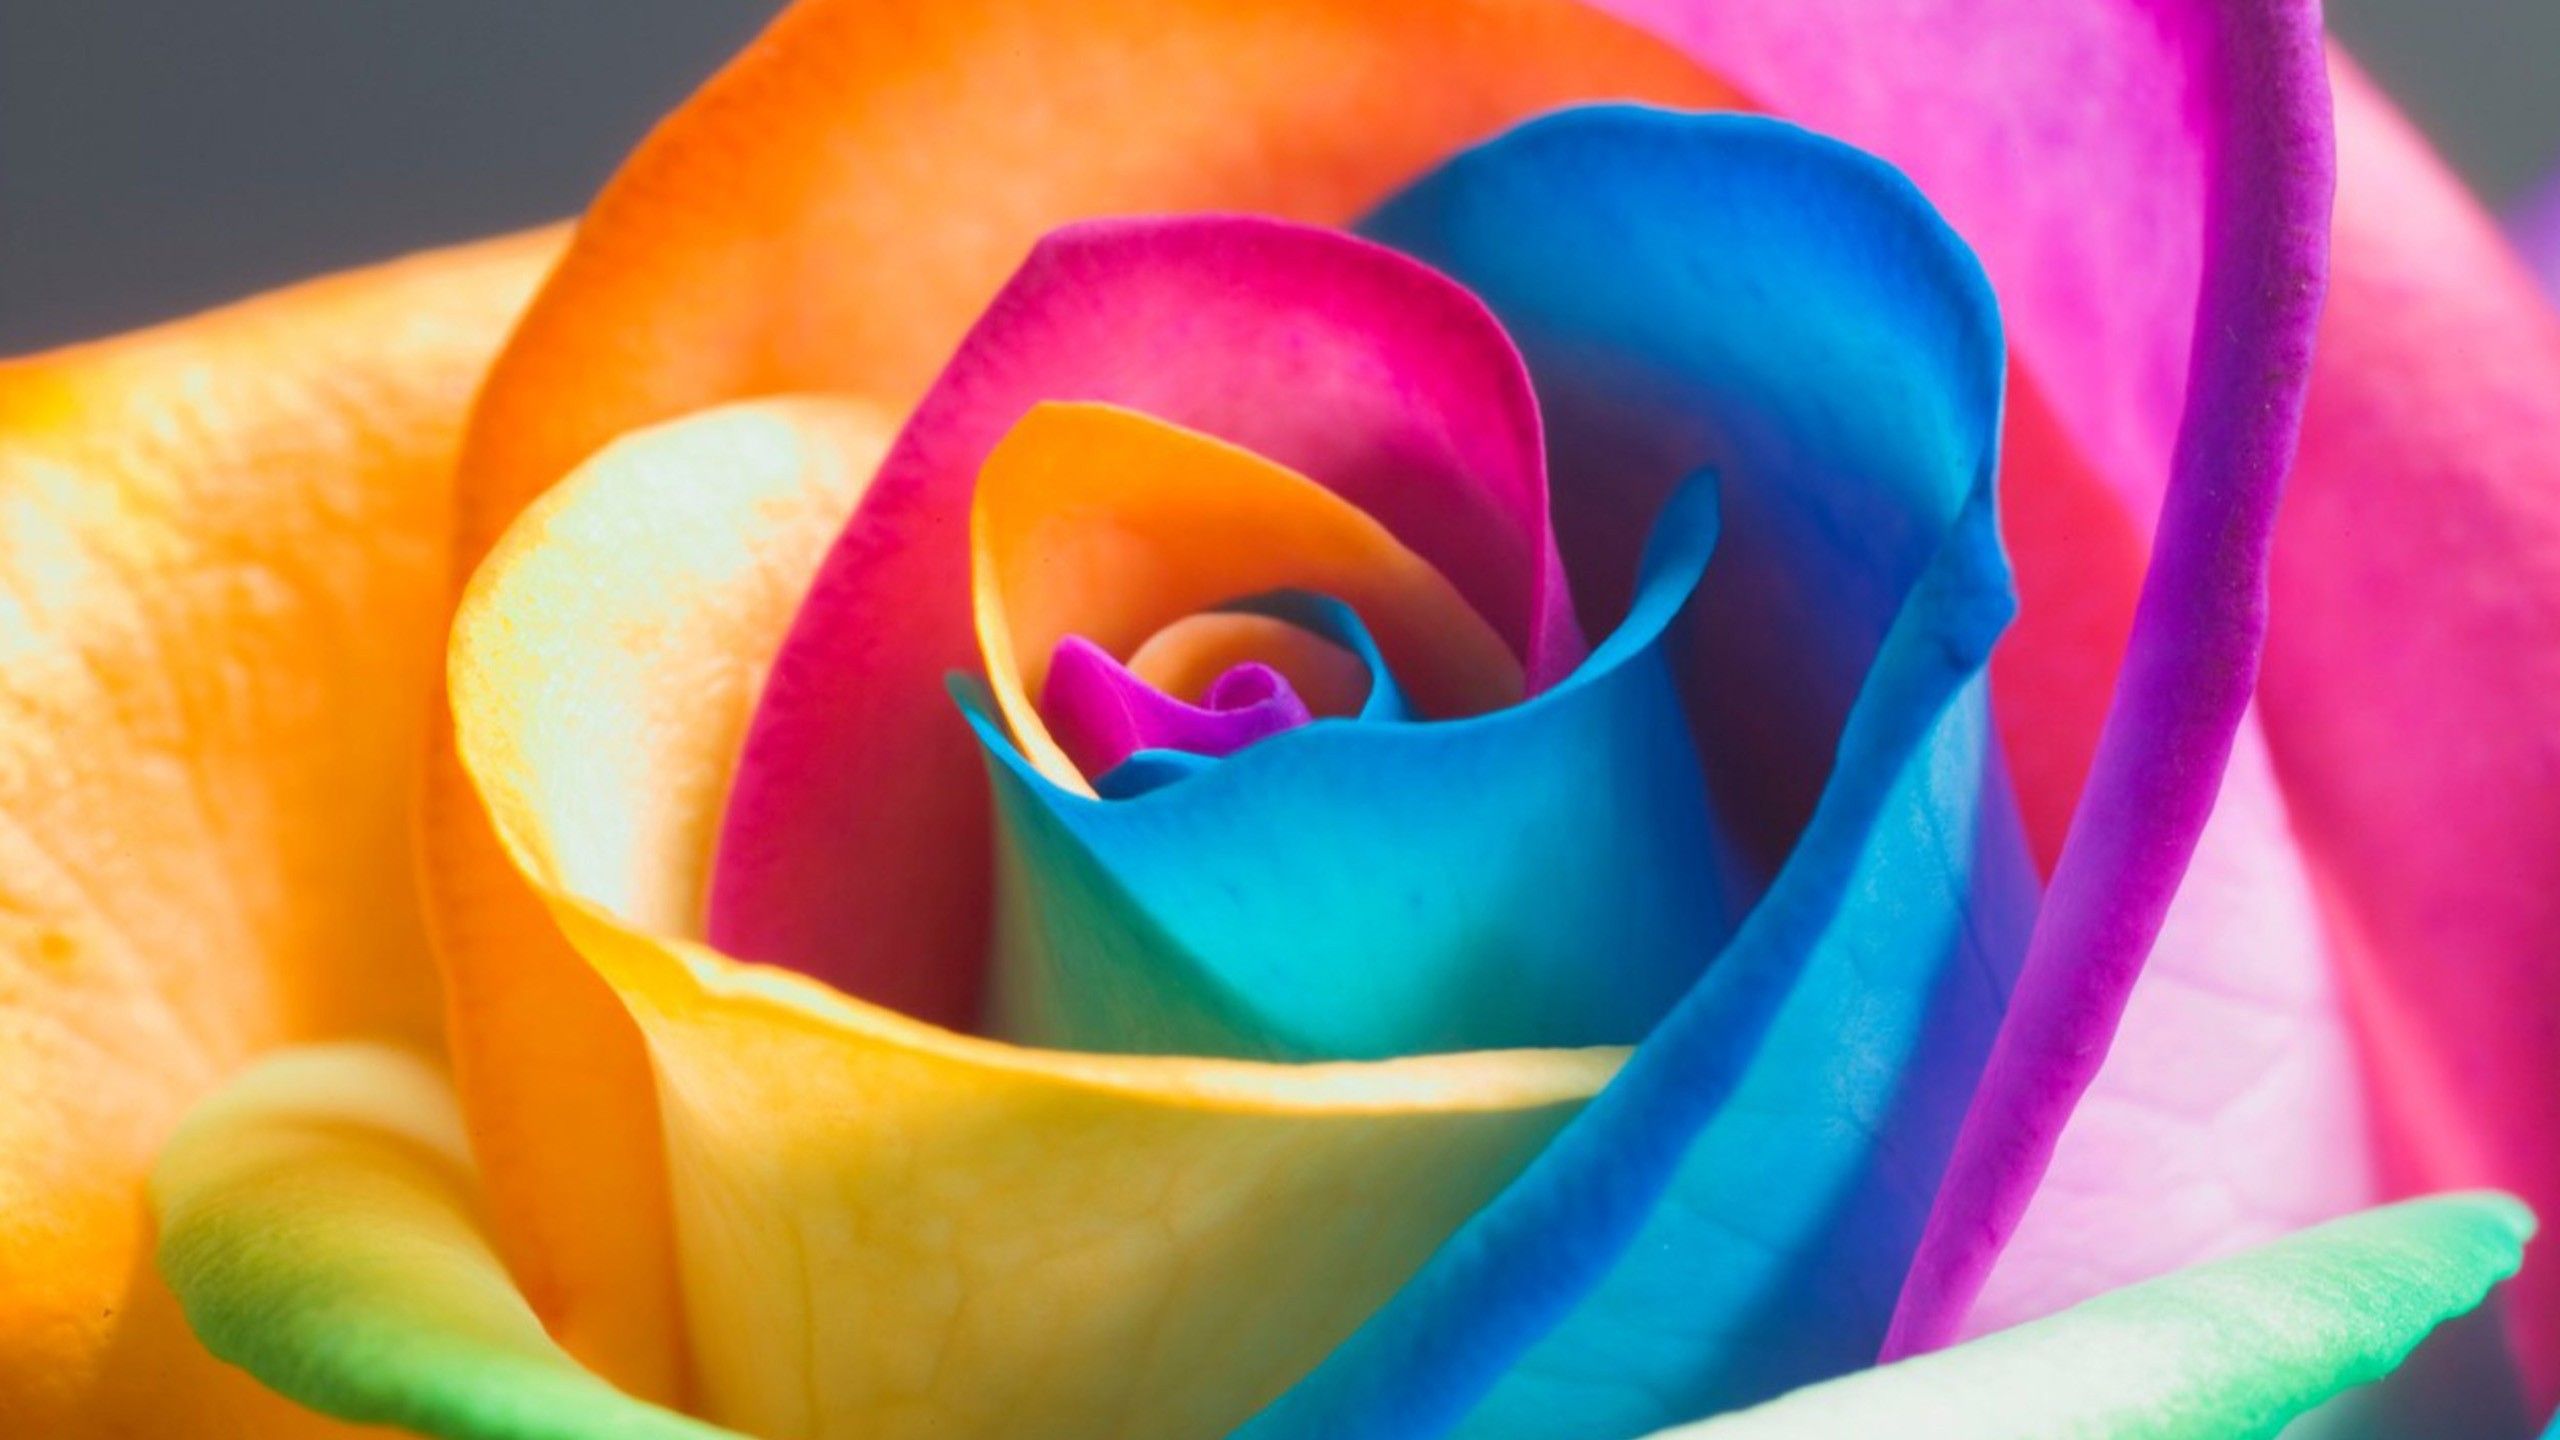 Rainbow Rose Wallpapers - Wallpaper Cave